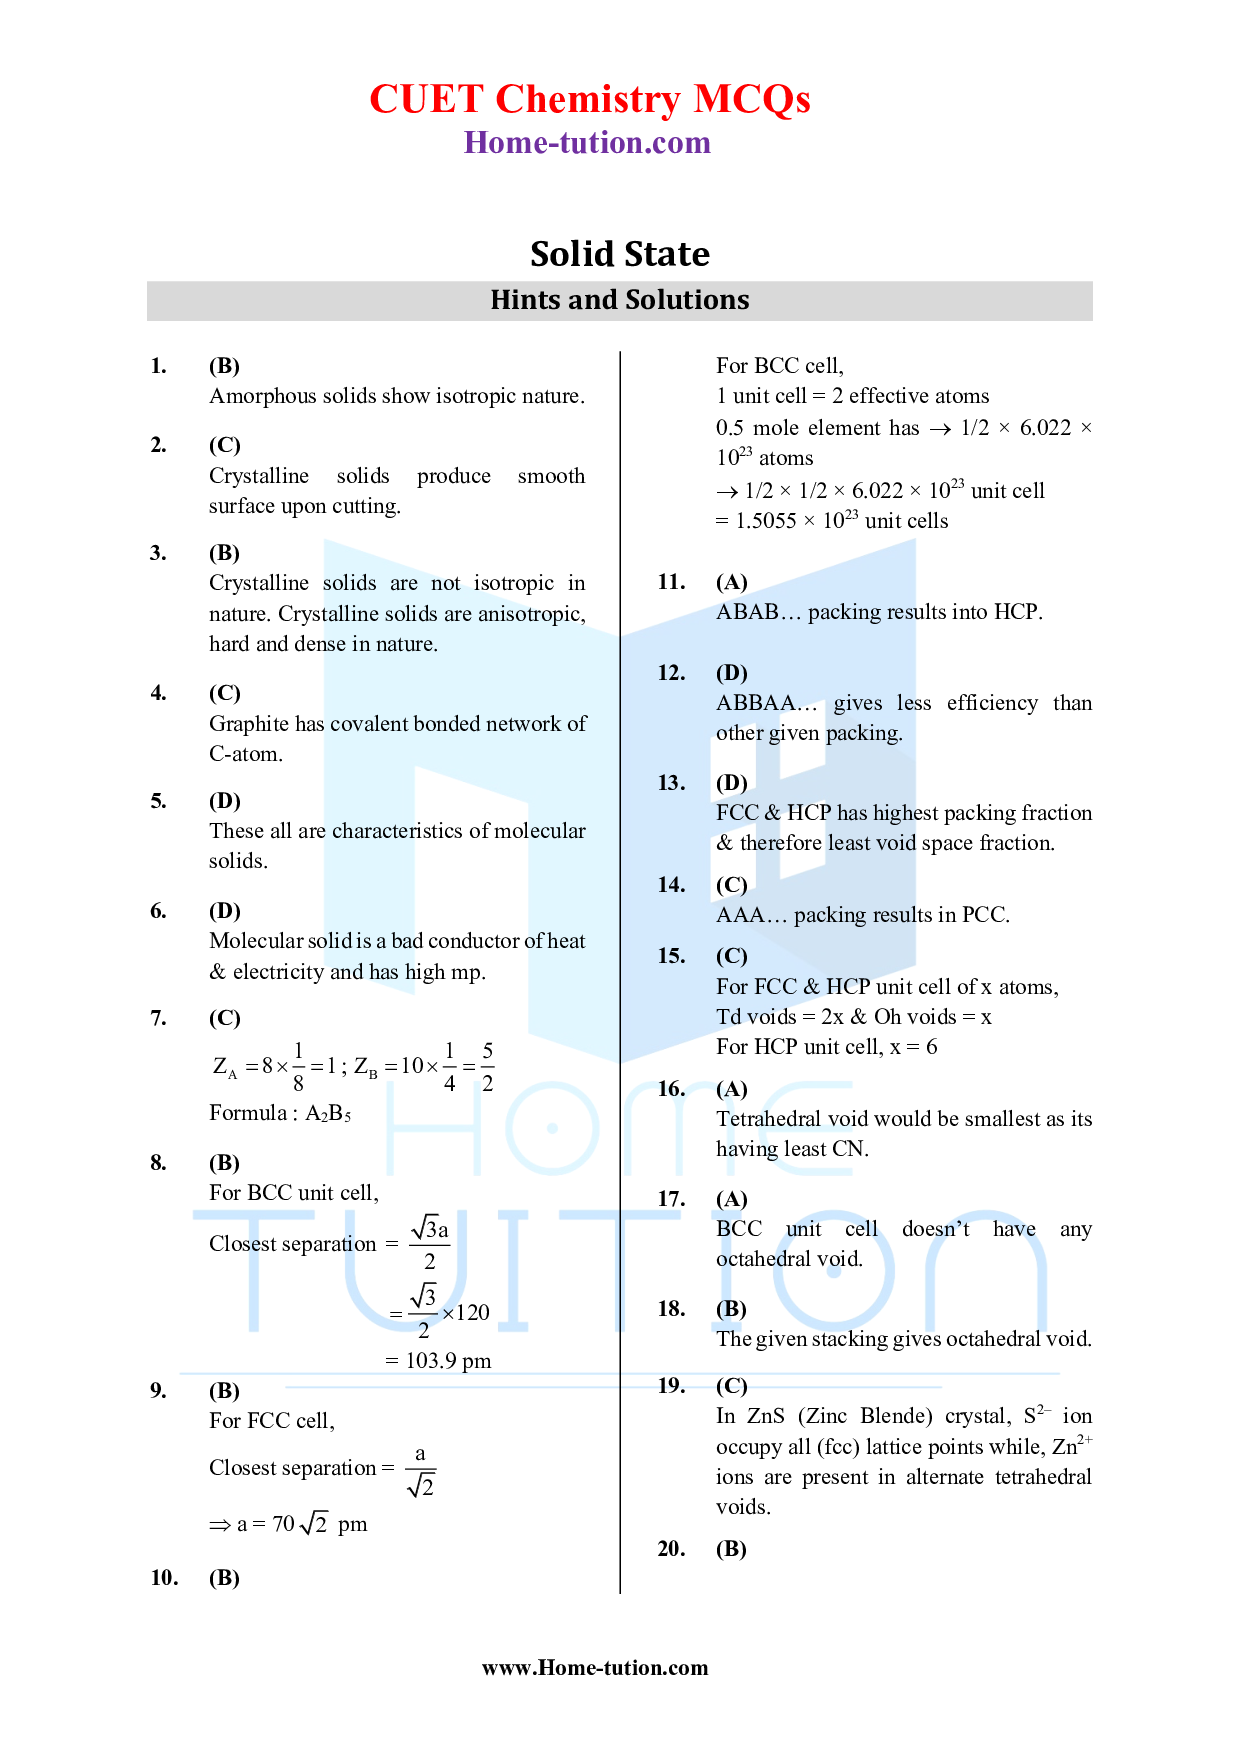 CUET MCQ Questions For Solid State